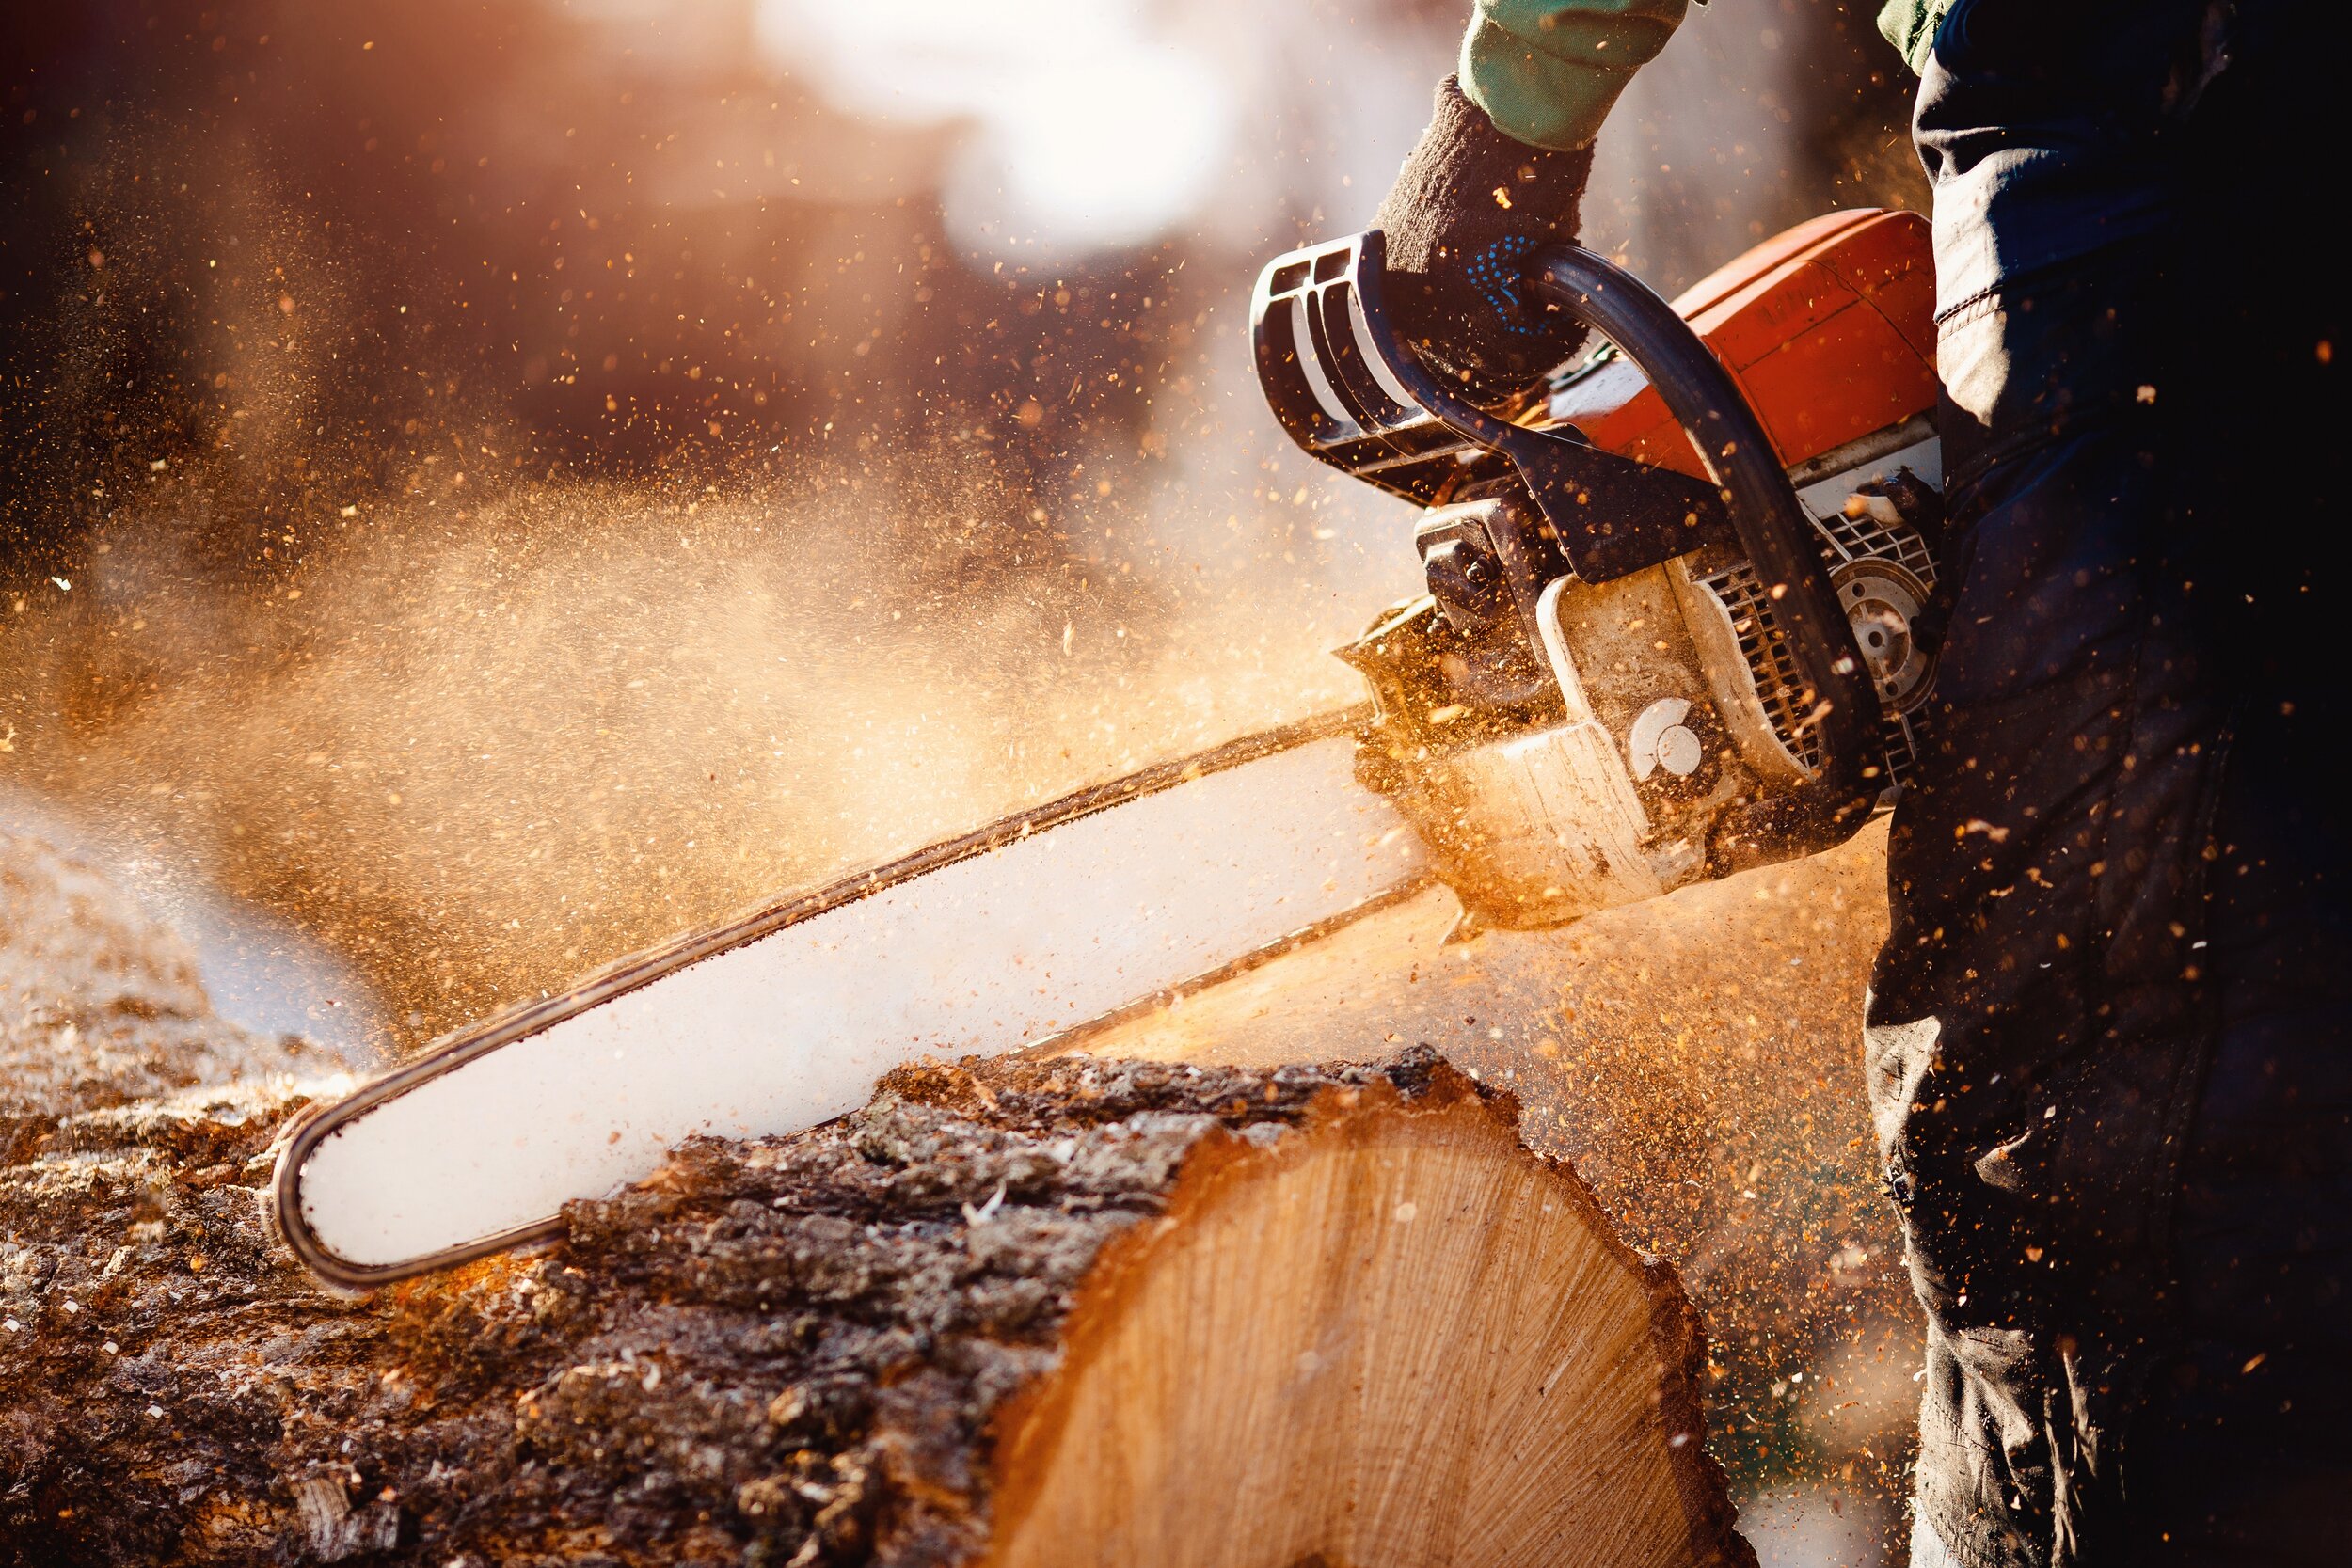 A tree removal crew in Springburst, KY, works diligently to cut down a large tree. The worker, equipped with safety gear and a chainsaw, creates a flurry of sawdust and wood chips.